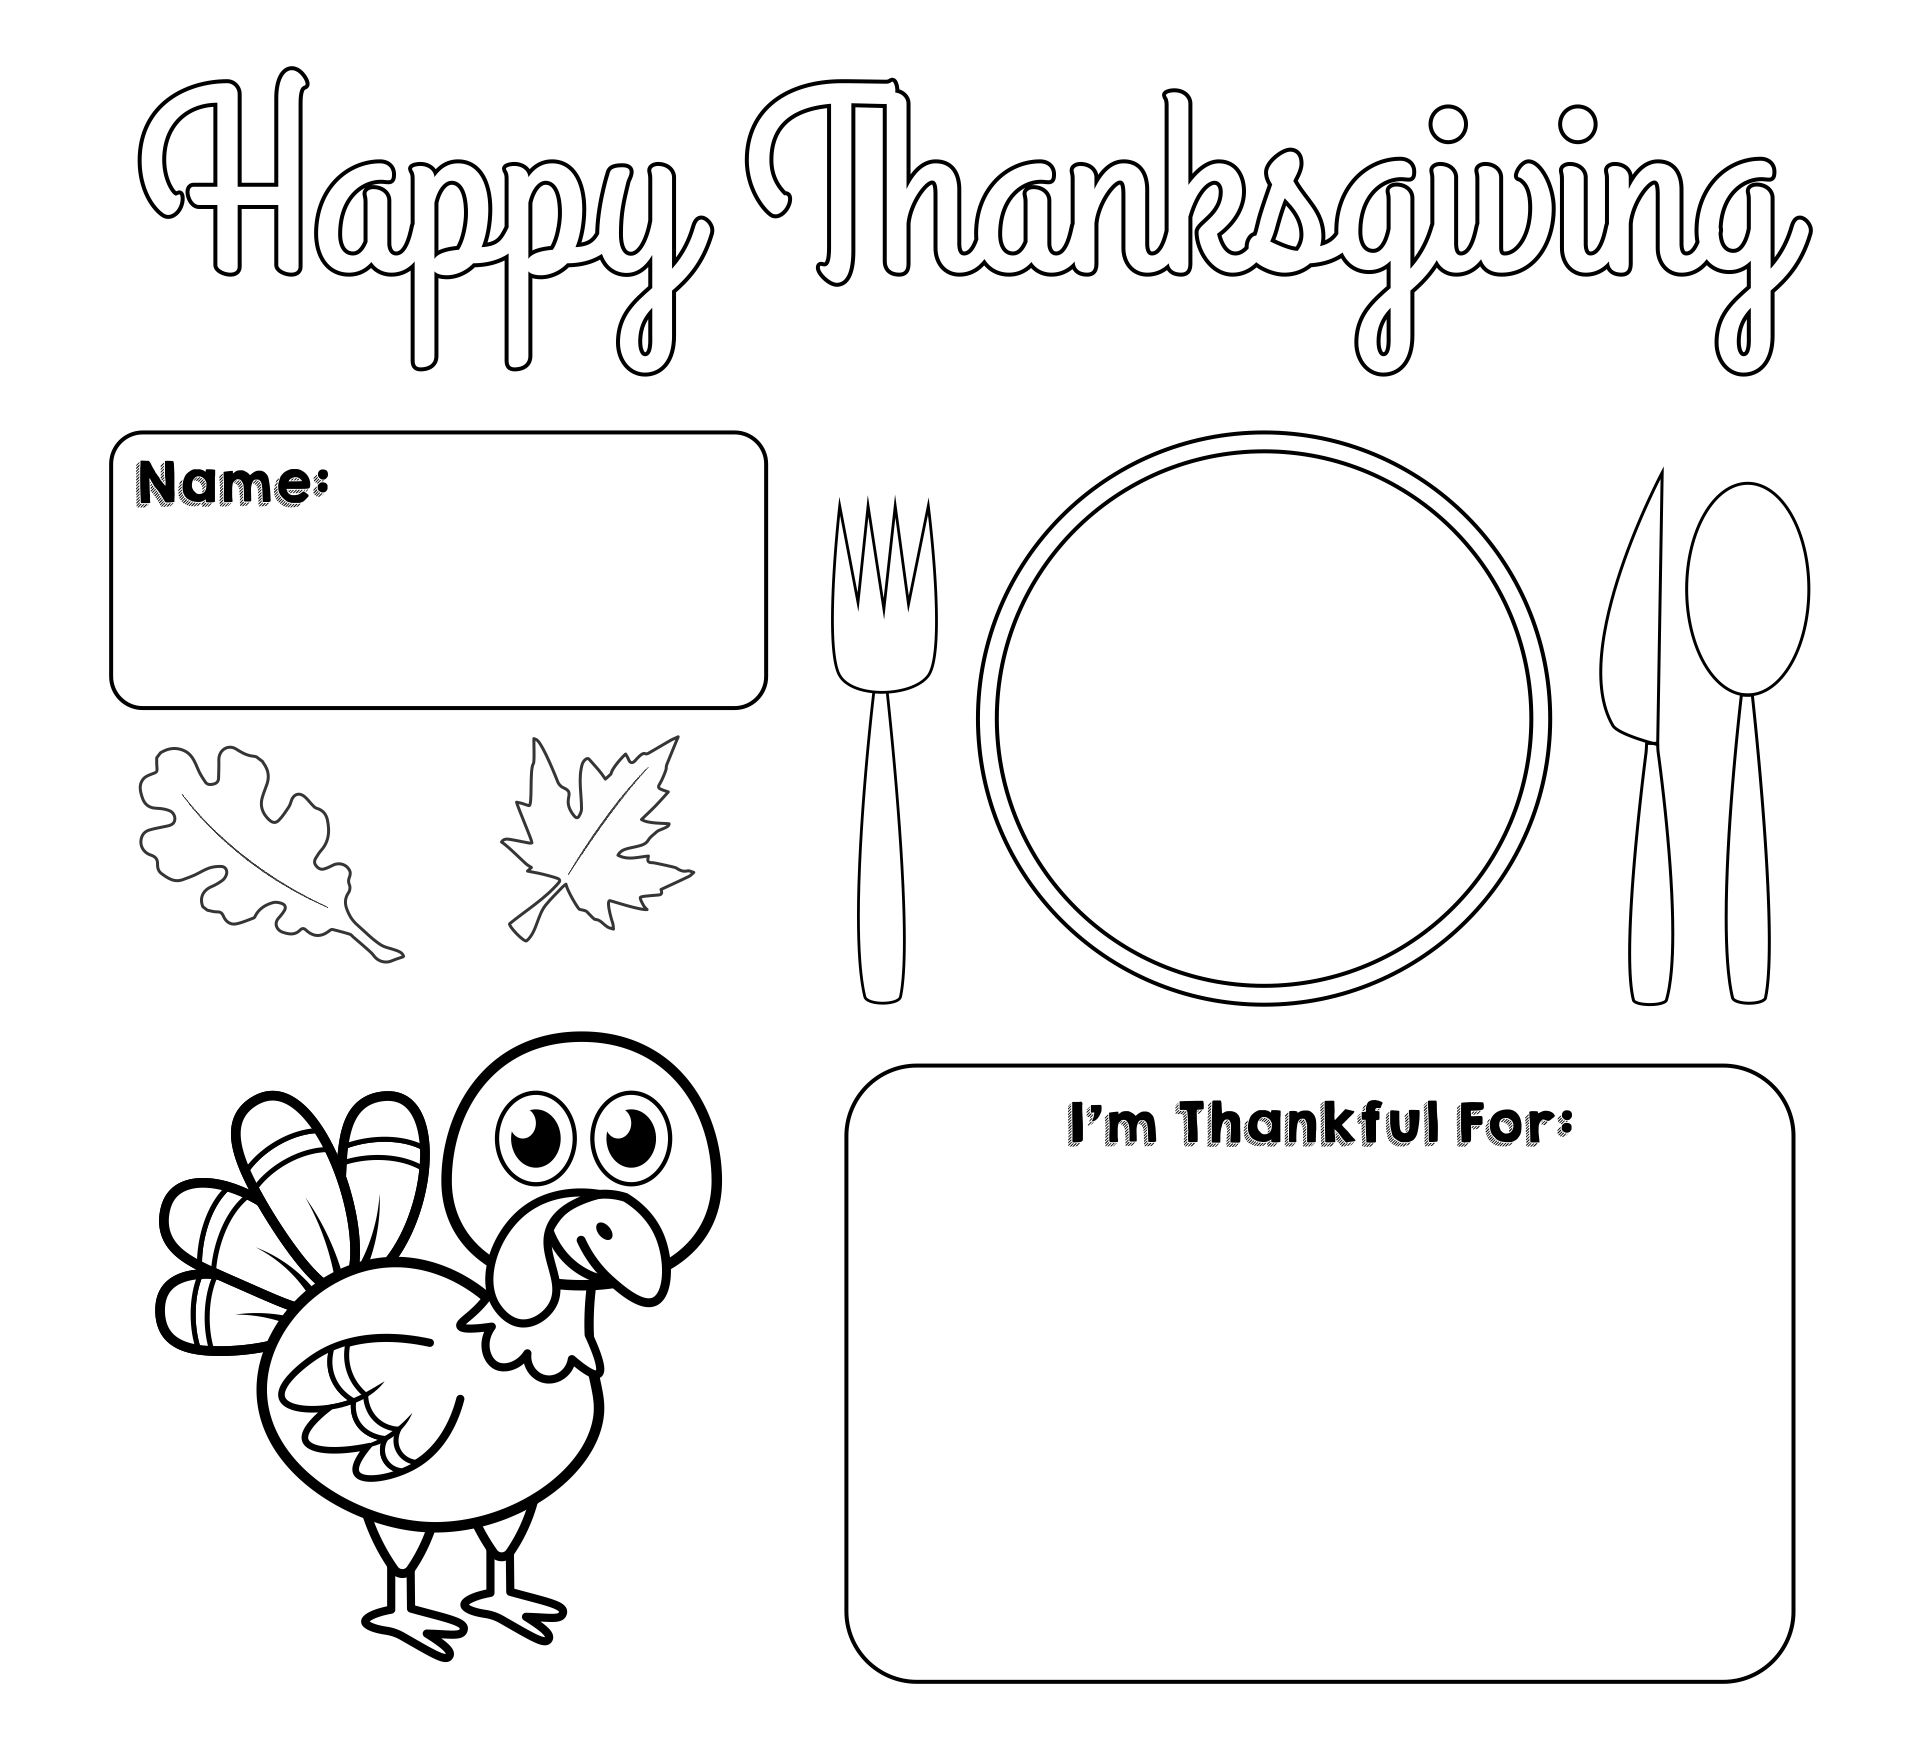 7 Best Images of Printable Placemats To Color - Kids Placemat Template ...